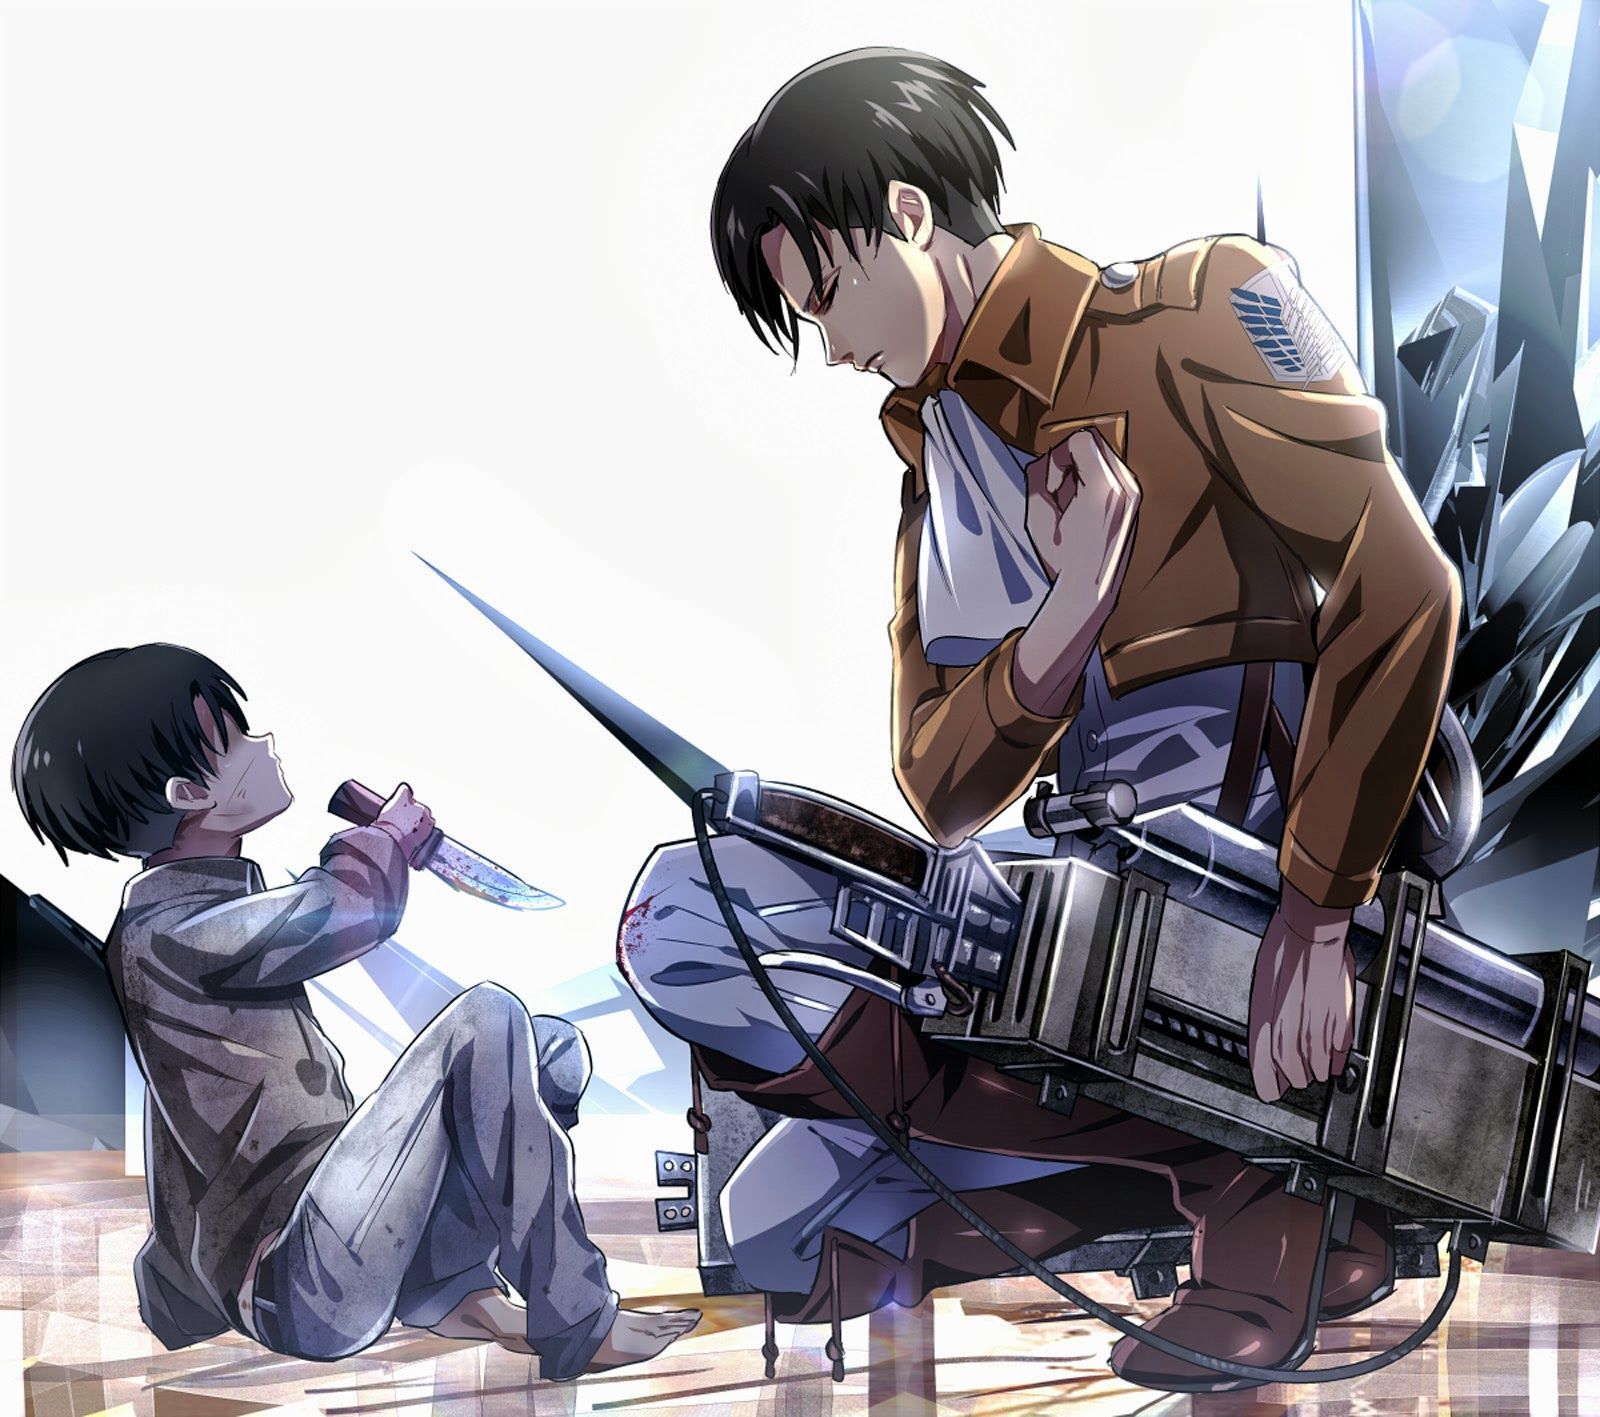 Featured image of post Captain Levi Wallpaper For Pc - Image of levi ackerman wallpaper for free download in different resolution hd widescreen 4k 5k 8k ultra hd wallpaper support different devices like desktop pc or laptop mobile and tablet.